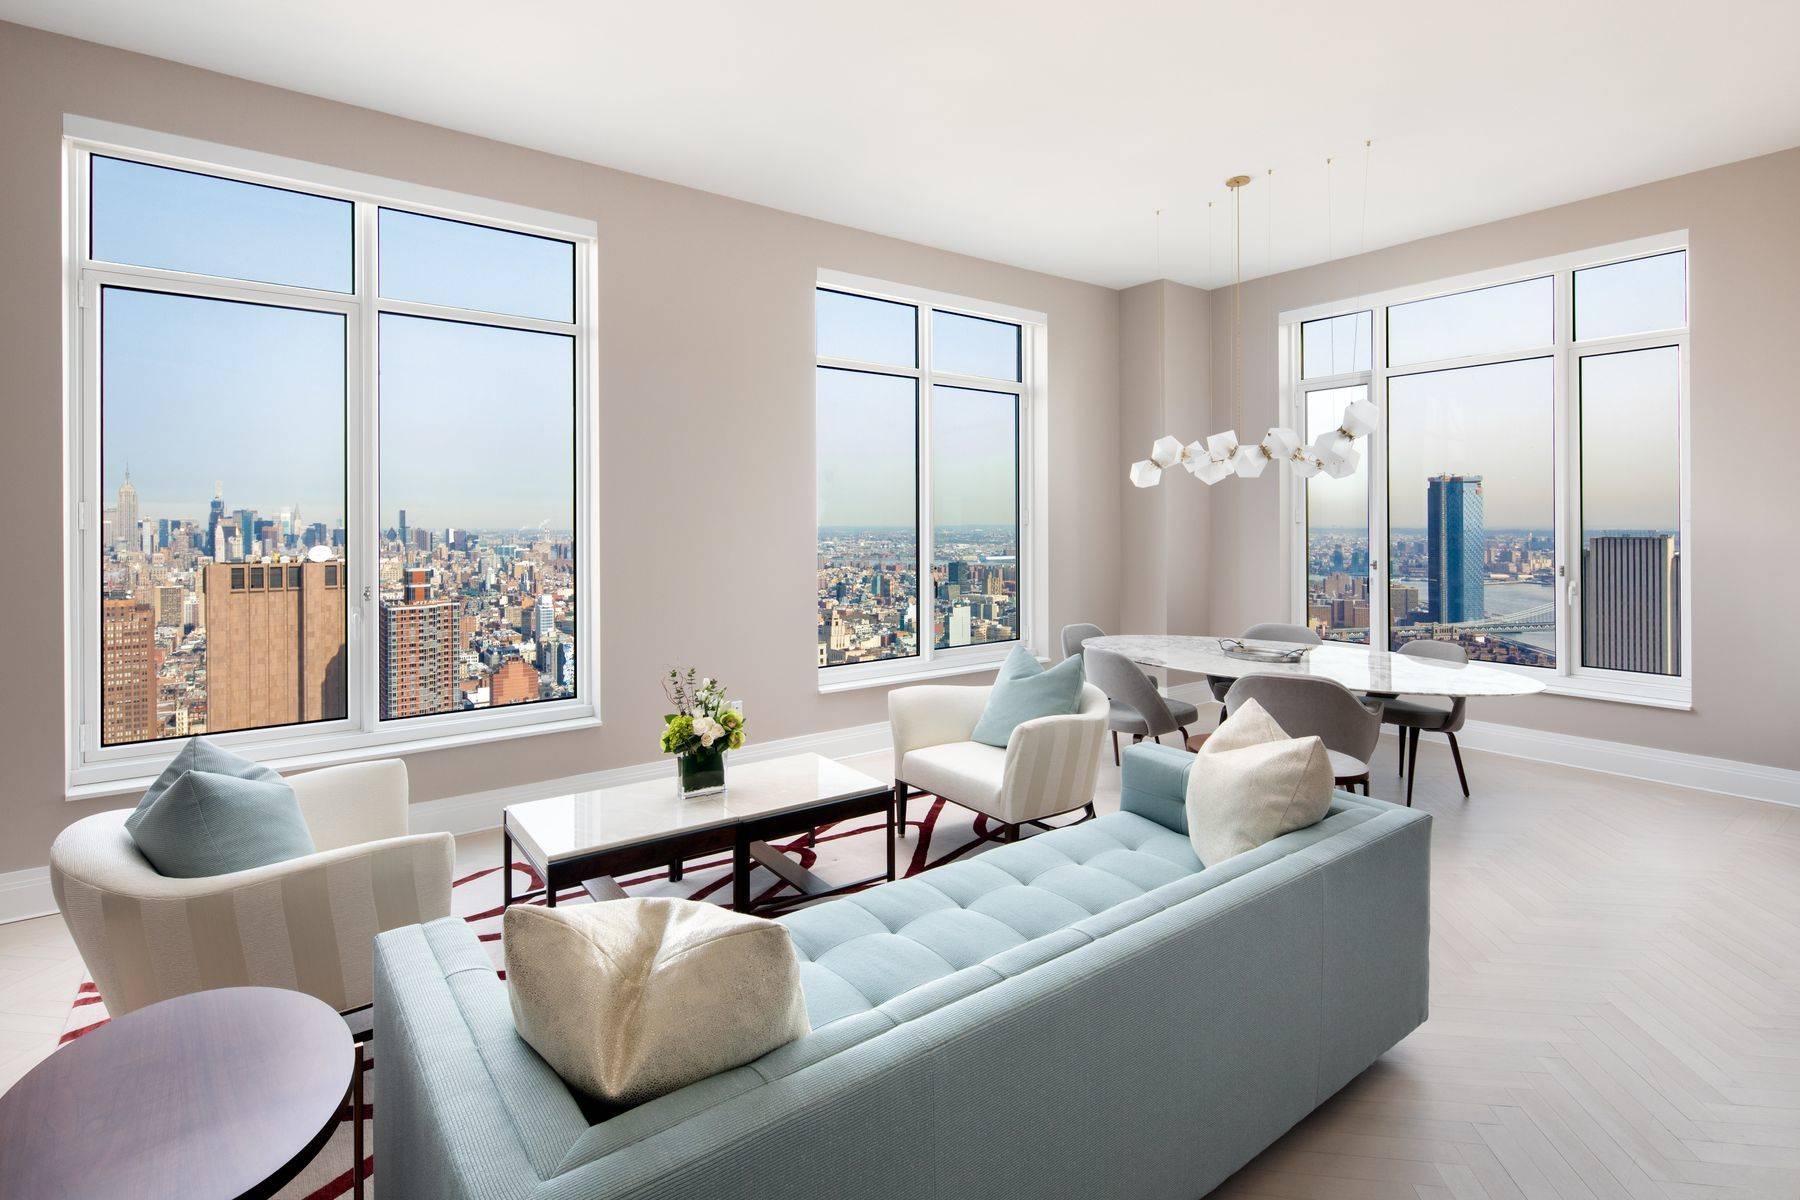 Five star living at the Four Seasons Private Residences New York, Downtown.